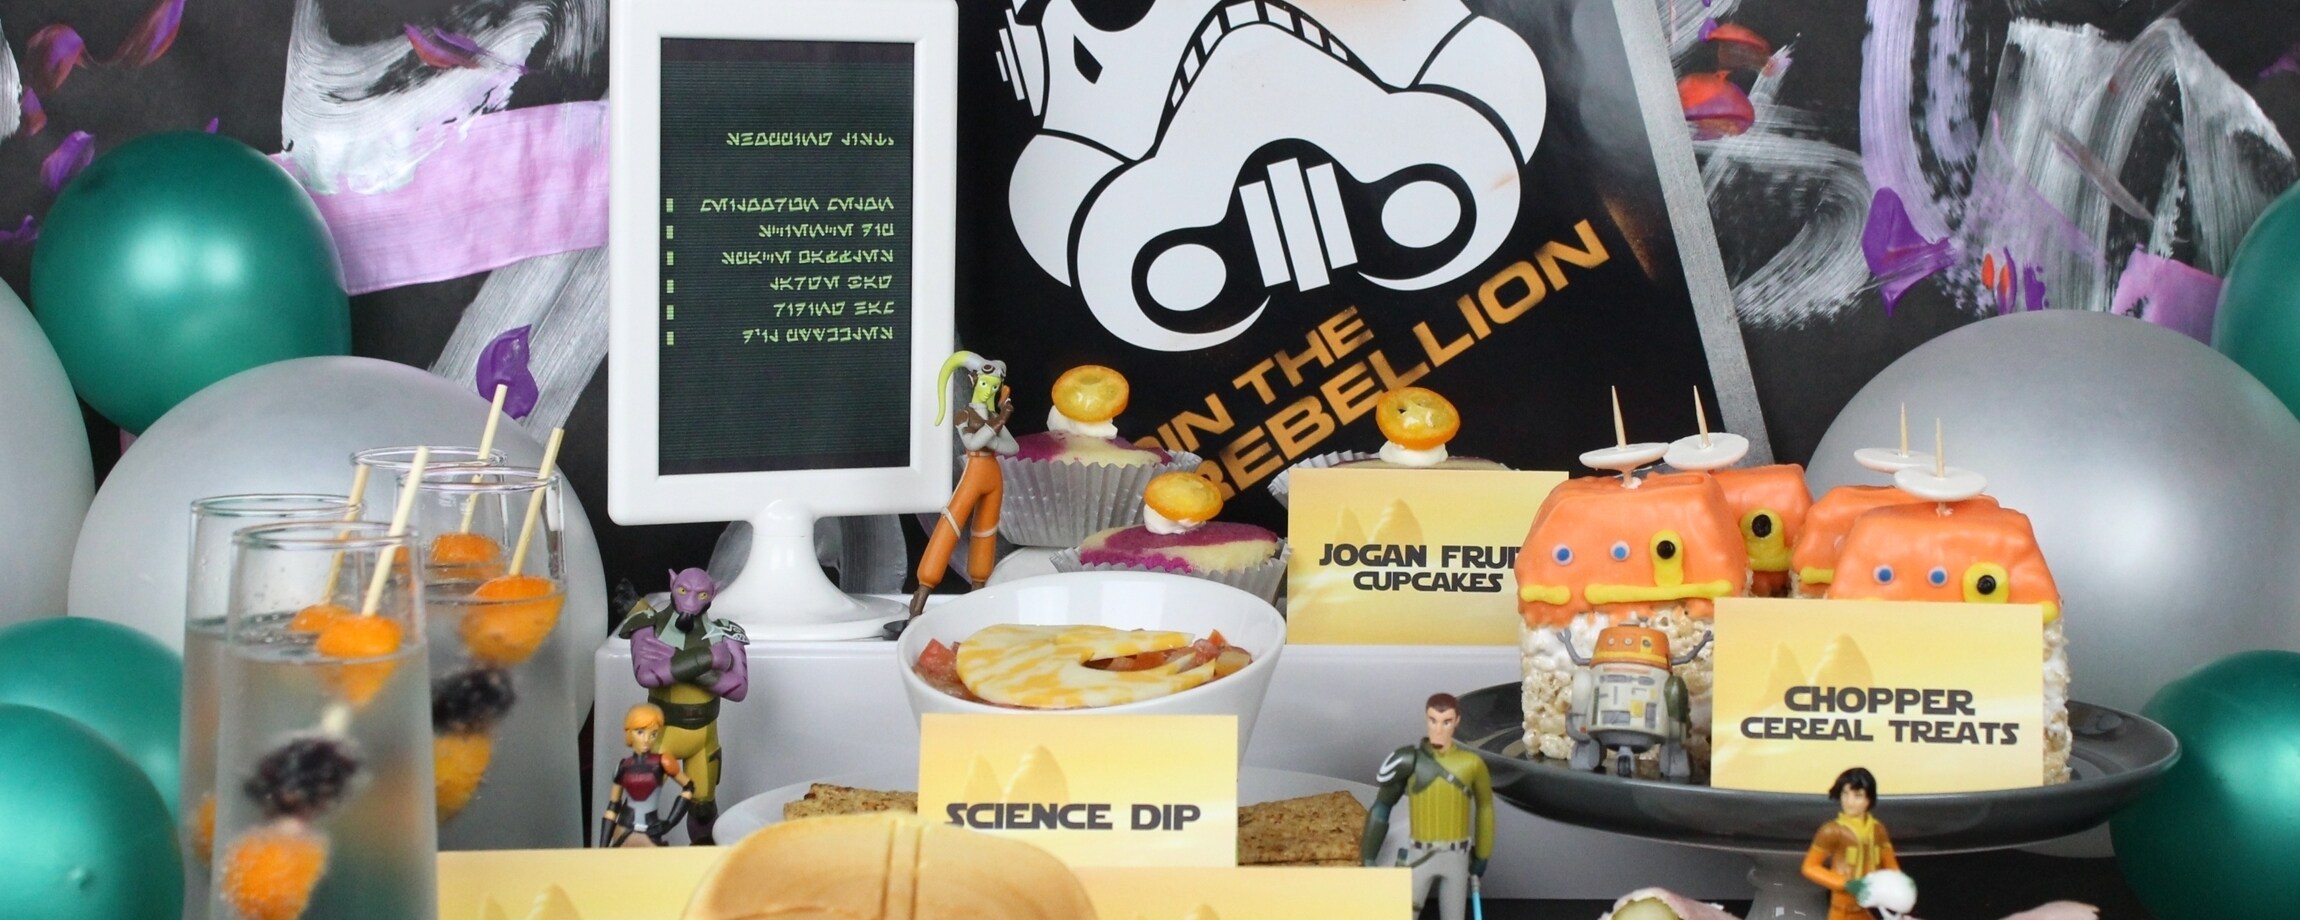 Throwing a Star Wars Rebels Party